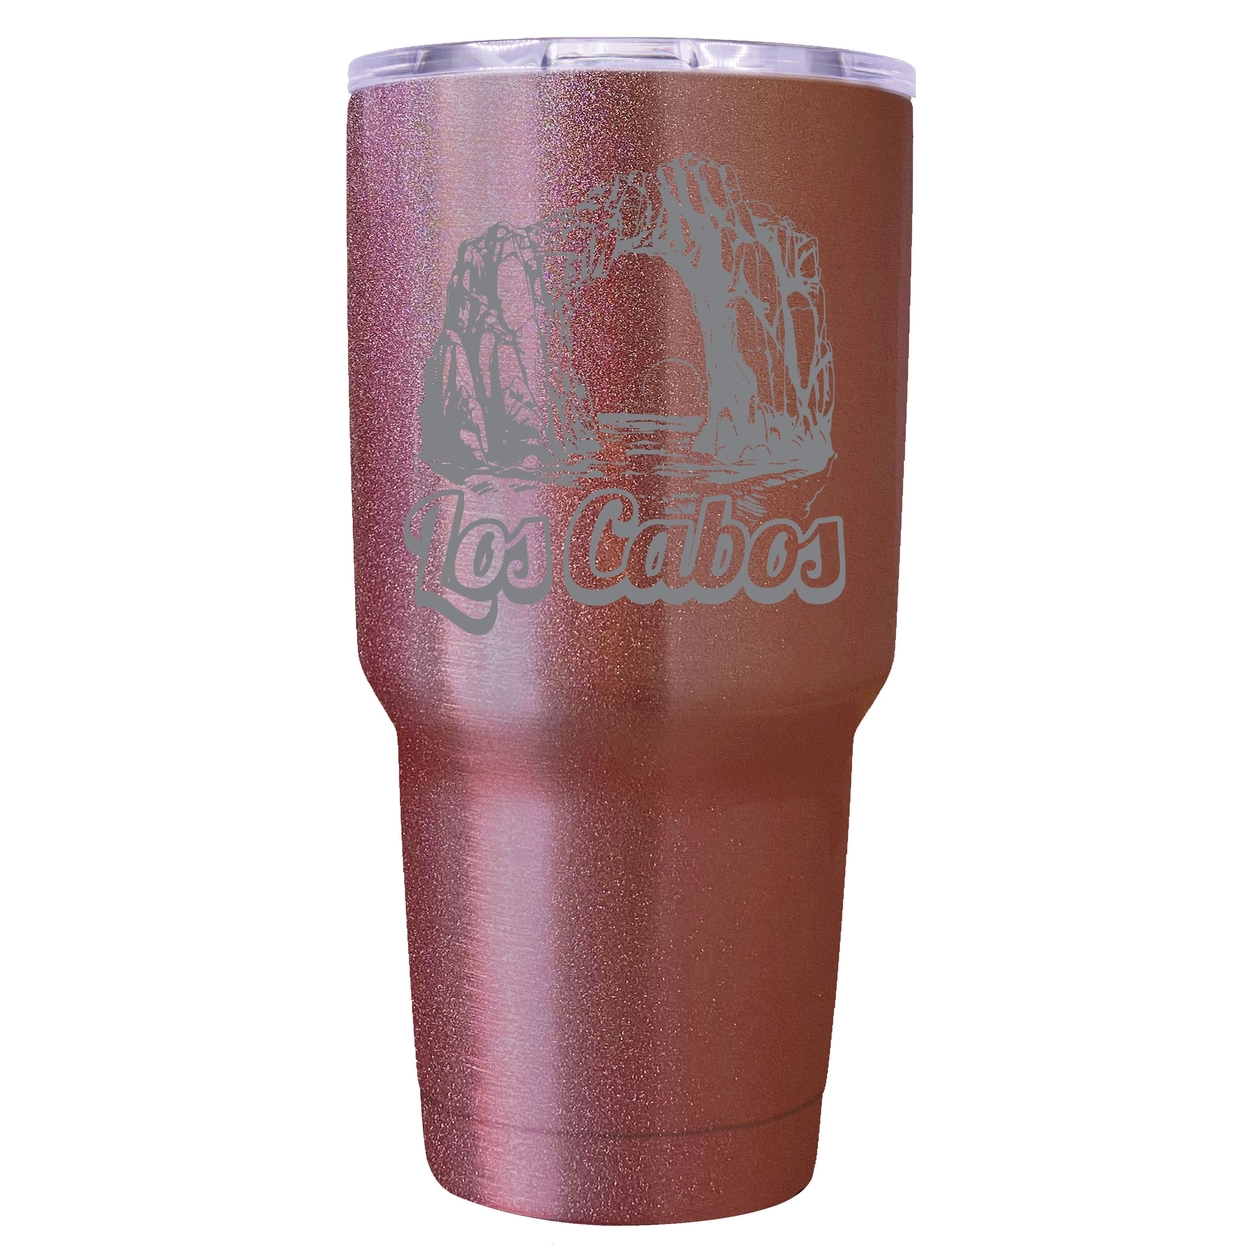 Los Cabos Mexico Souvenir 24 Oz Engraved Insulated Stainless Steel Tumbler - Rose Gold,,Single Unit